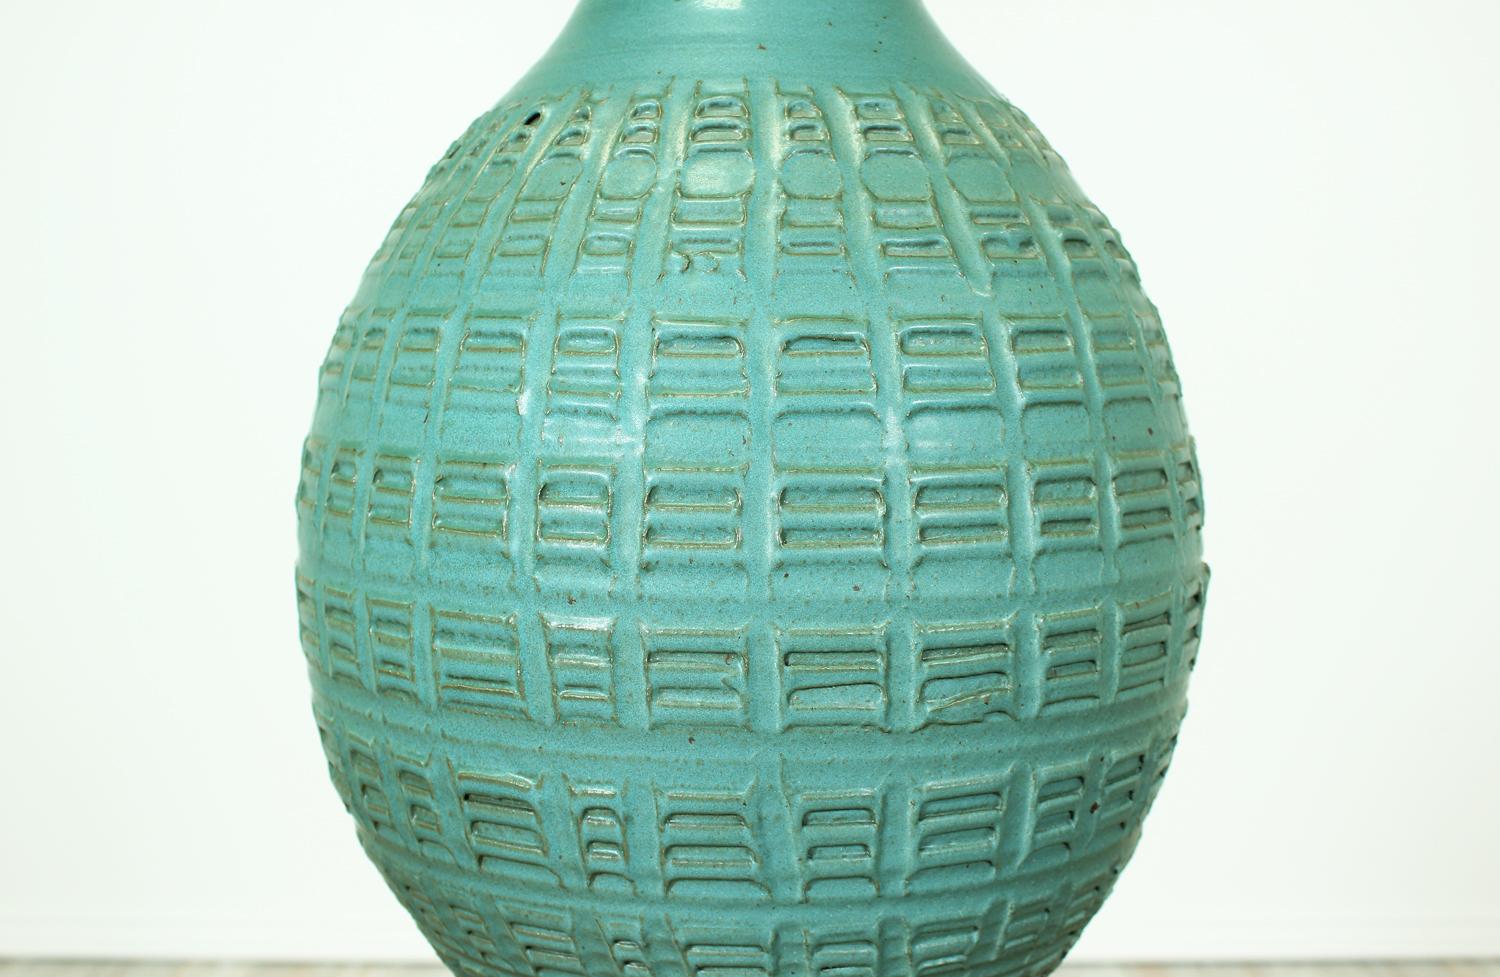 Mid-20th Century Bob Kinzie “N-Series” Glazed Teal Ceramic Table Lamp for Affiliated Craftsmen